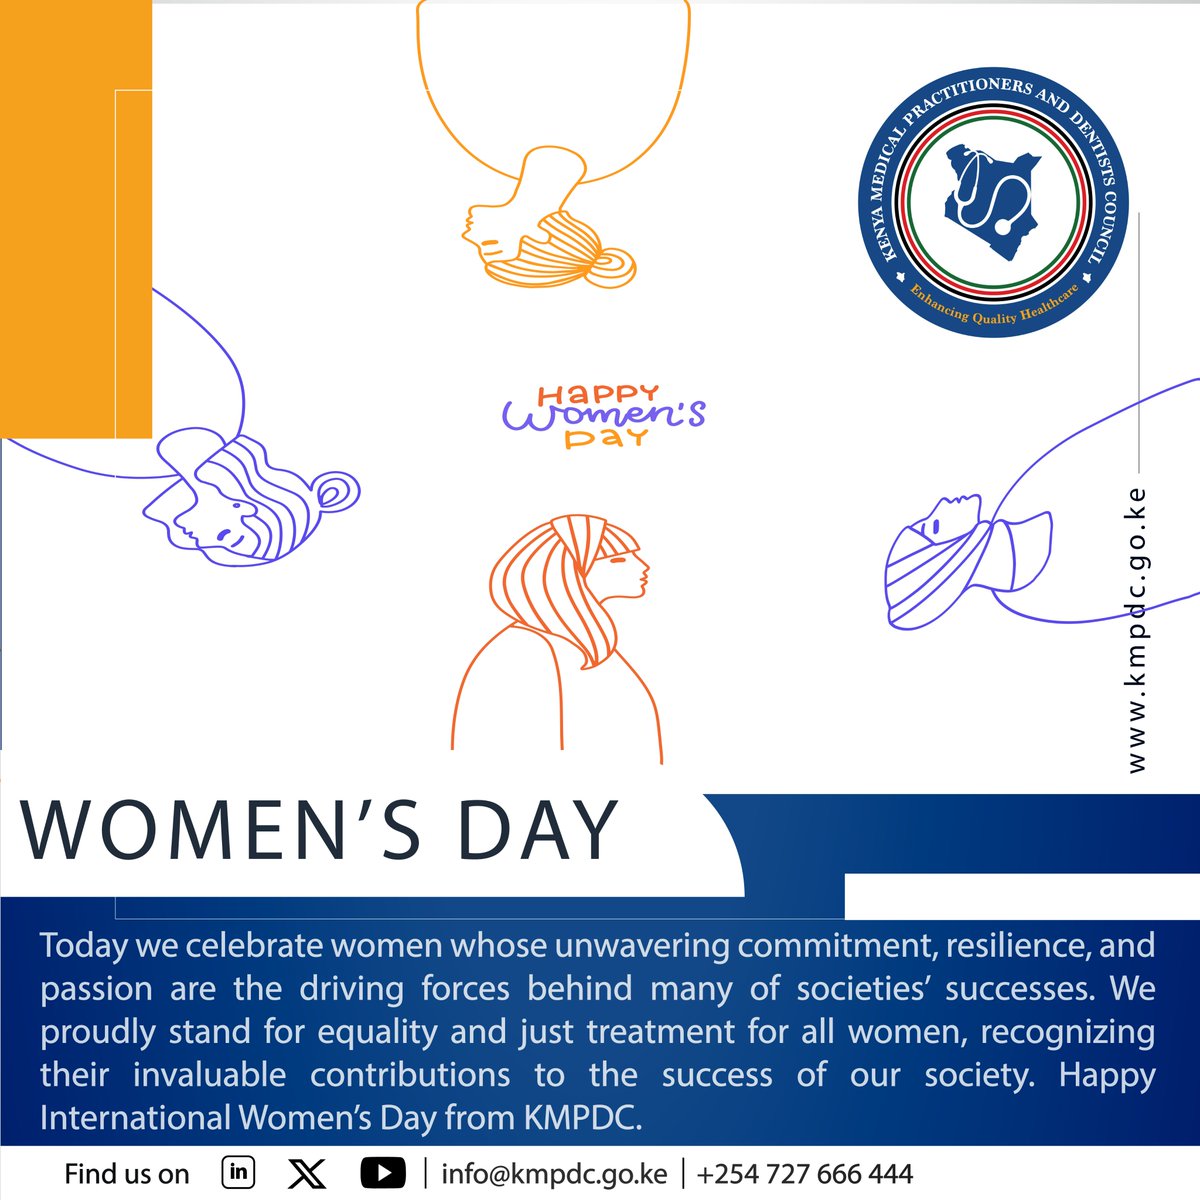 Today we celebrate women whose unwavering commitment, resilience, and passion are the driving forces behind many of societies’ successes. We proudly stand for equality and just treatment for all women, recognizing their invaluable contributions to the success of our society.…